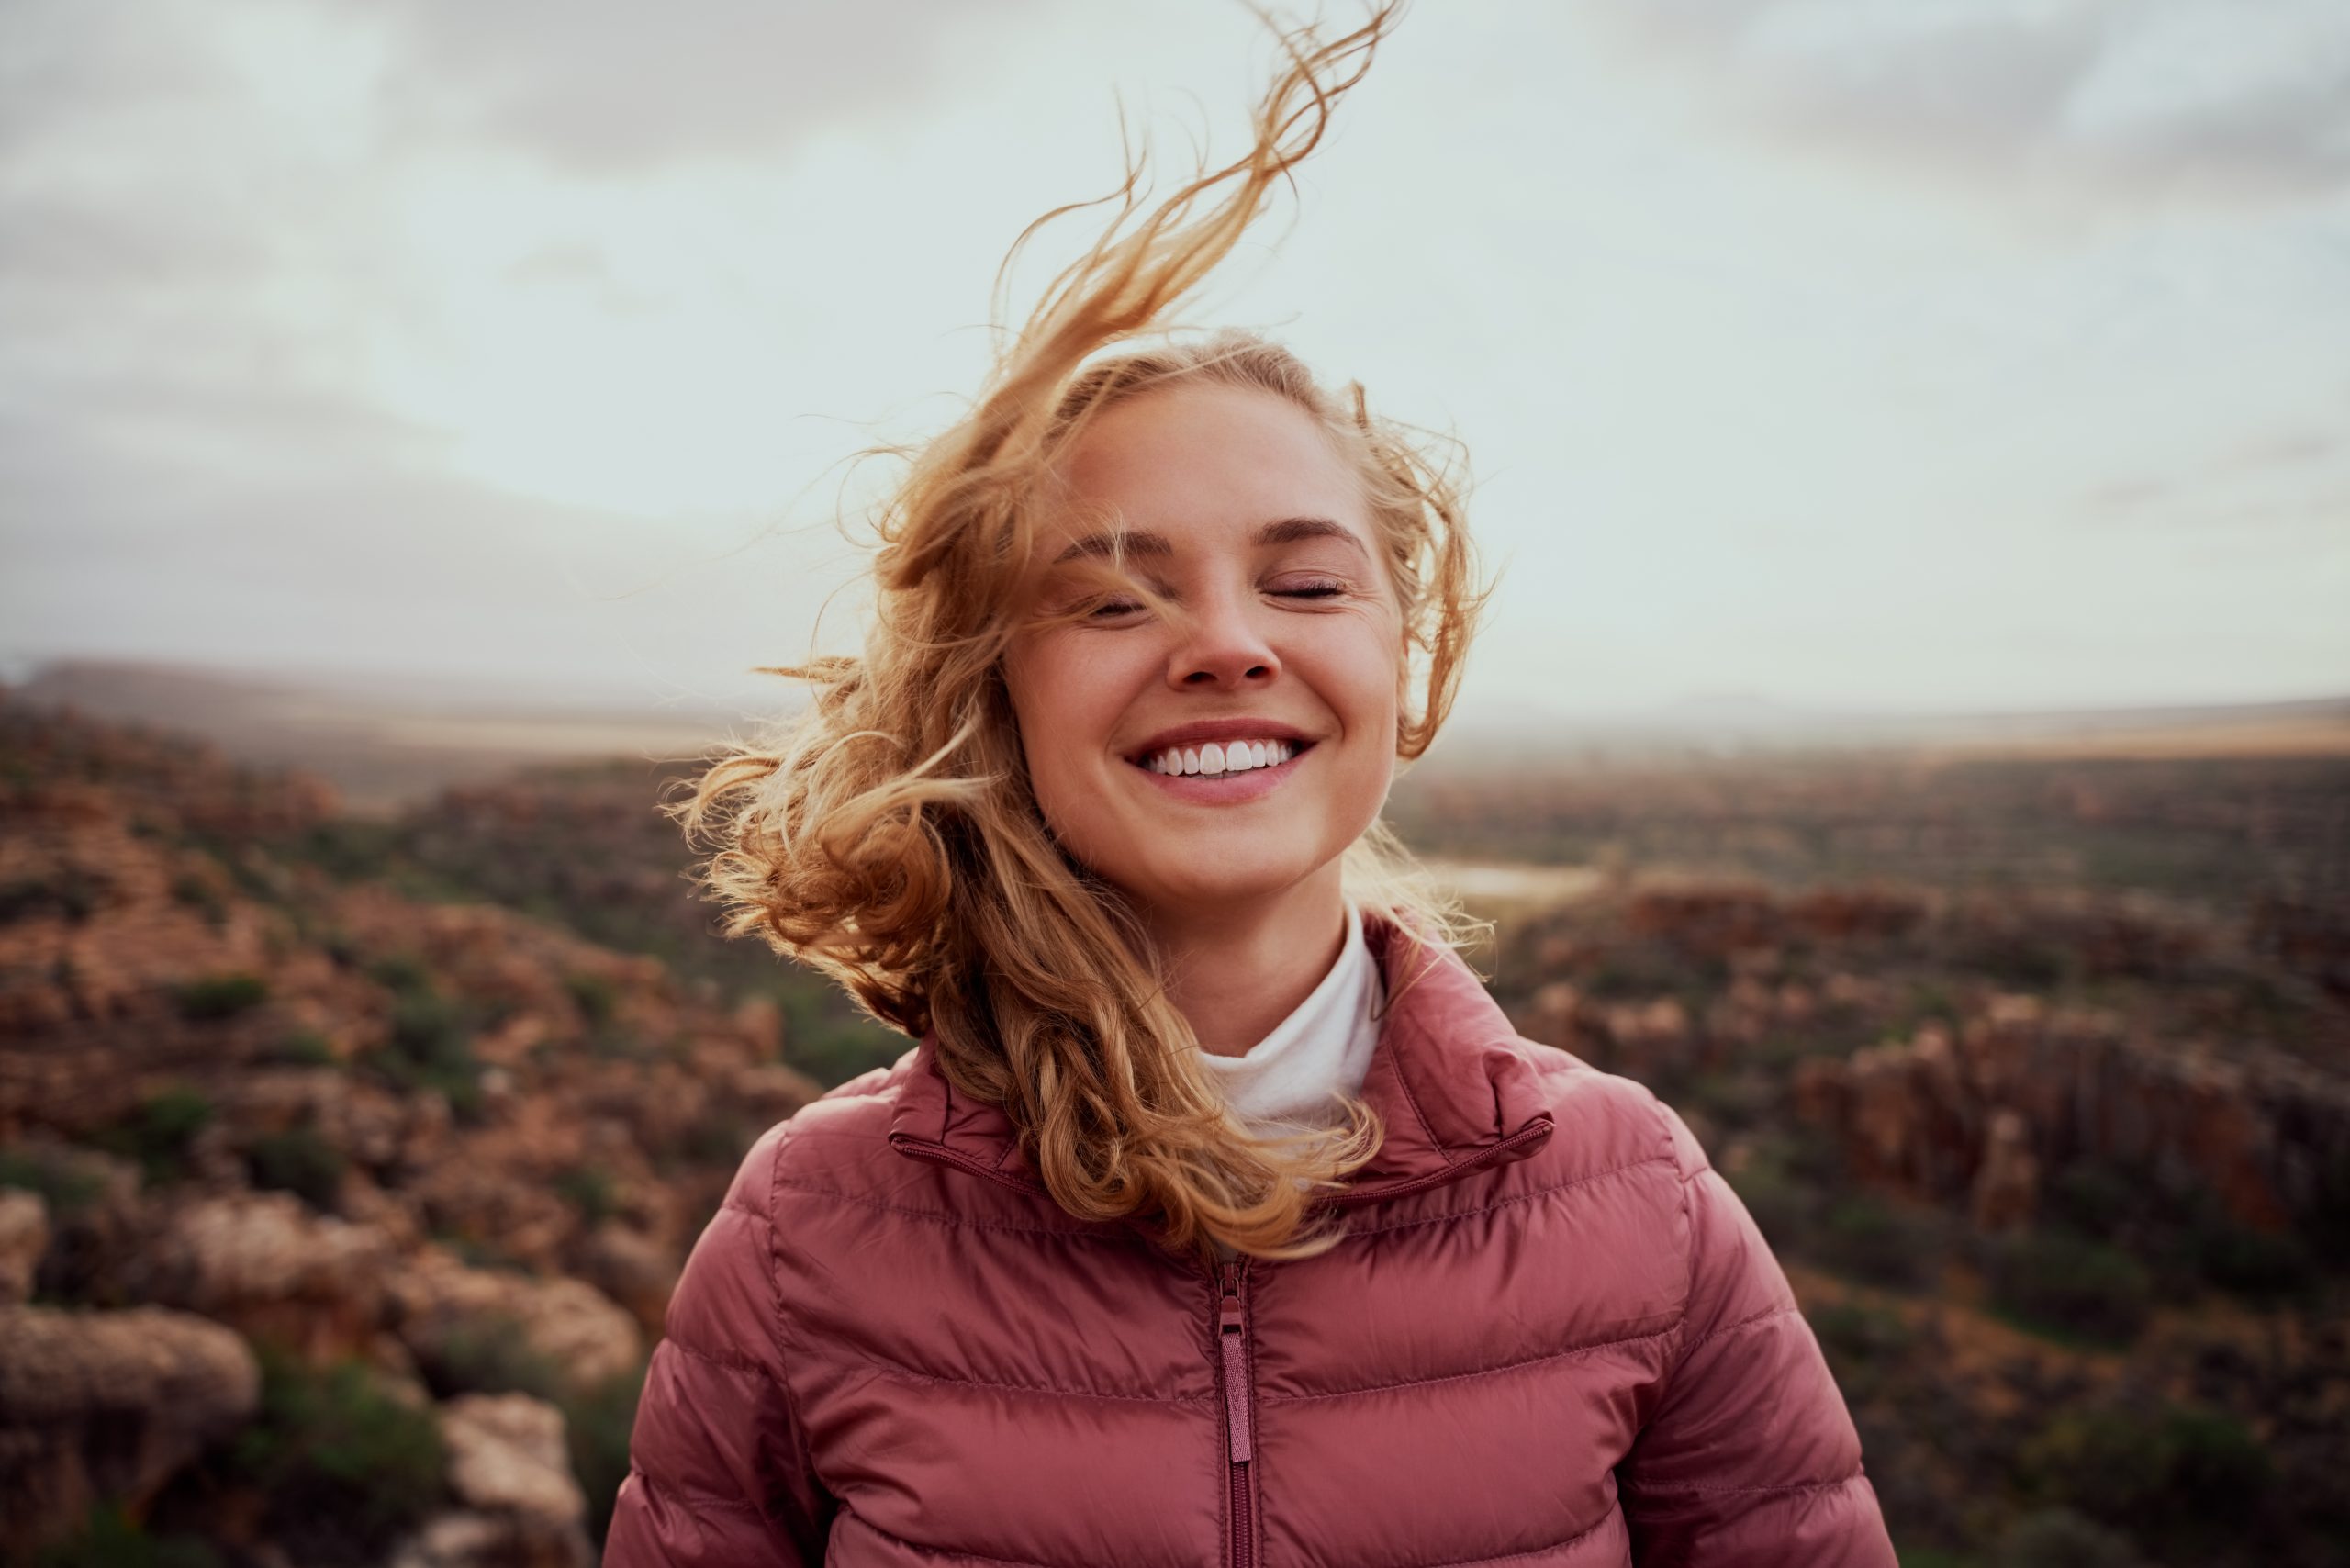 A blonde young lady standing outside enjoying feeling the the wind in her face.